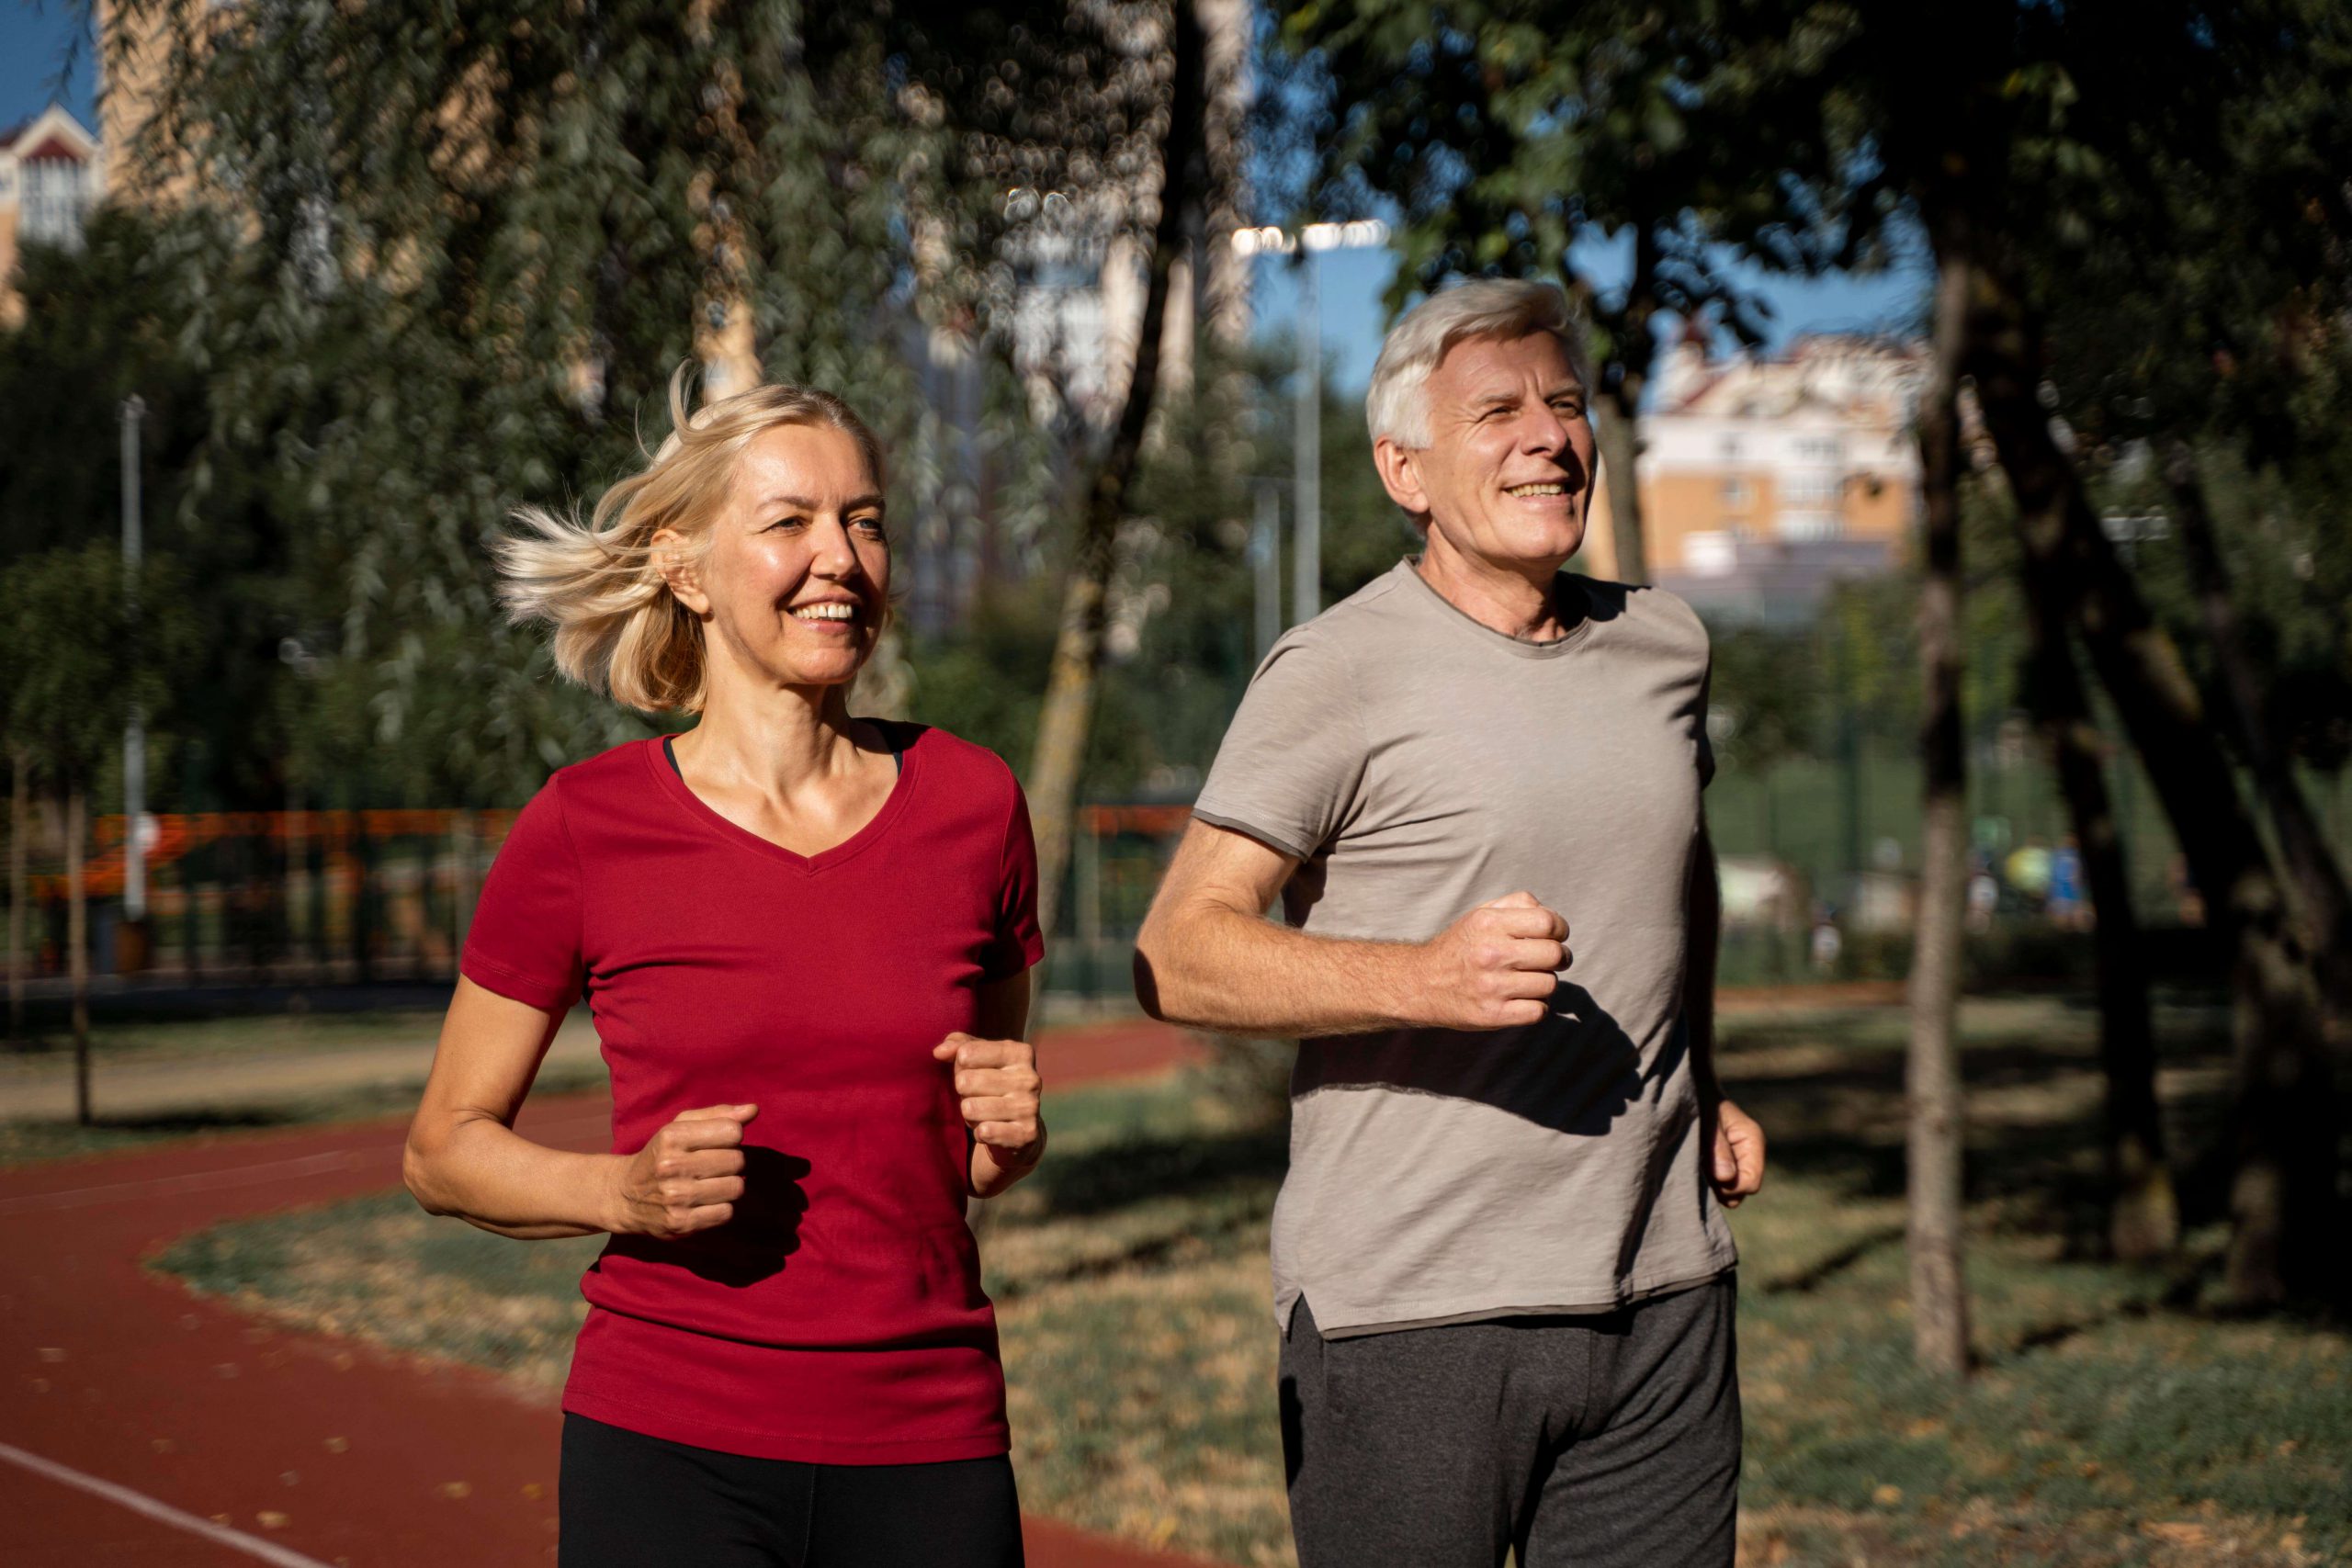 smiley-older-couple-jogging-outdoors (1)